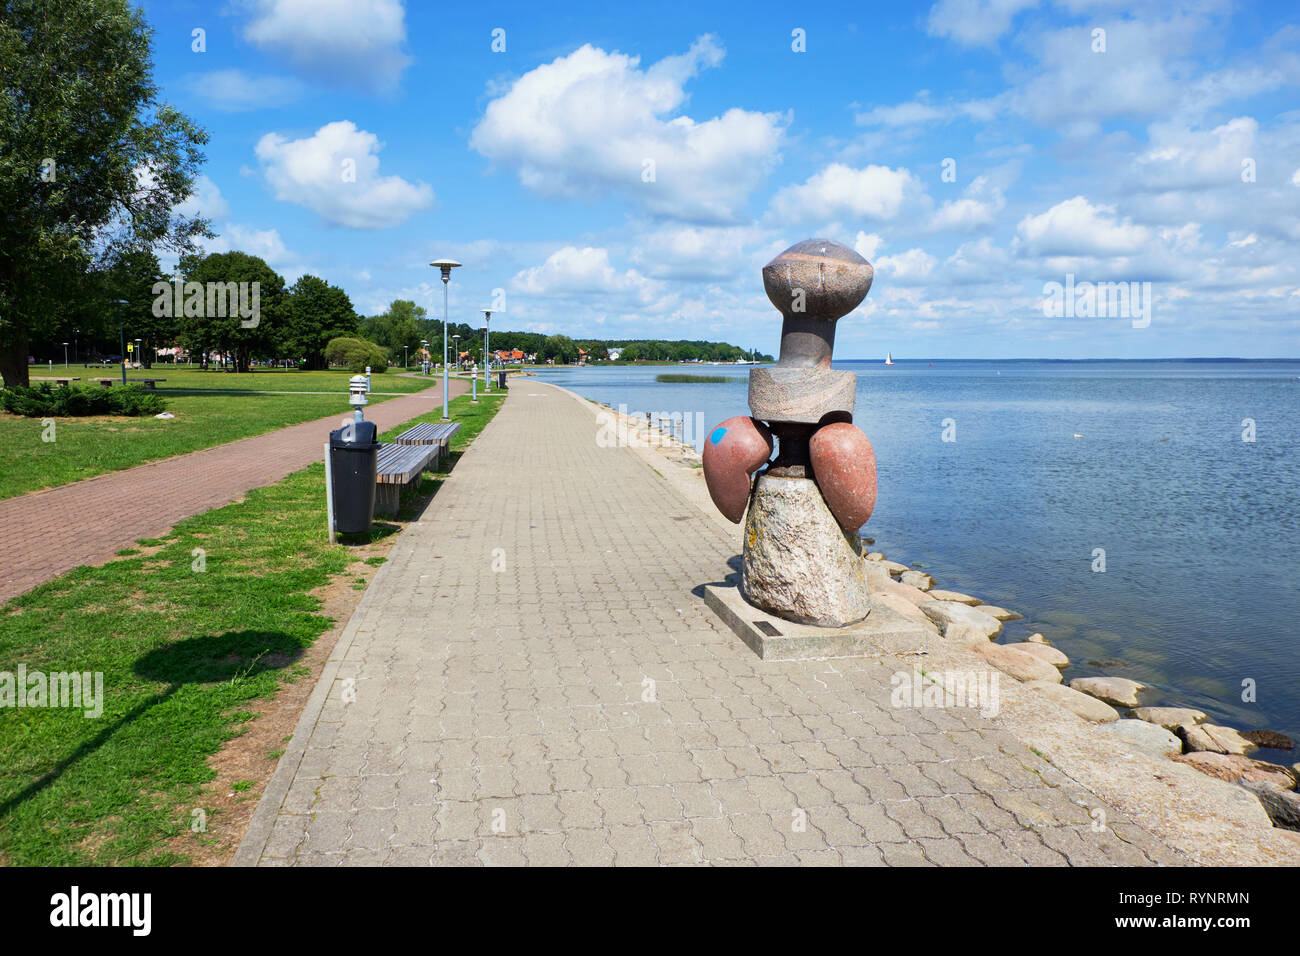 JUODKRANTE, LITHUANIA - AUGUST 06, 2018: Stone sculpture on the promenade. Juodkrante is a resort town at Curonian Spit  in Lithuania Stock Photo